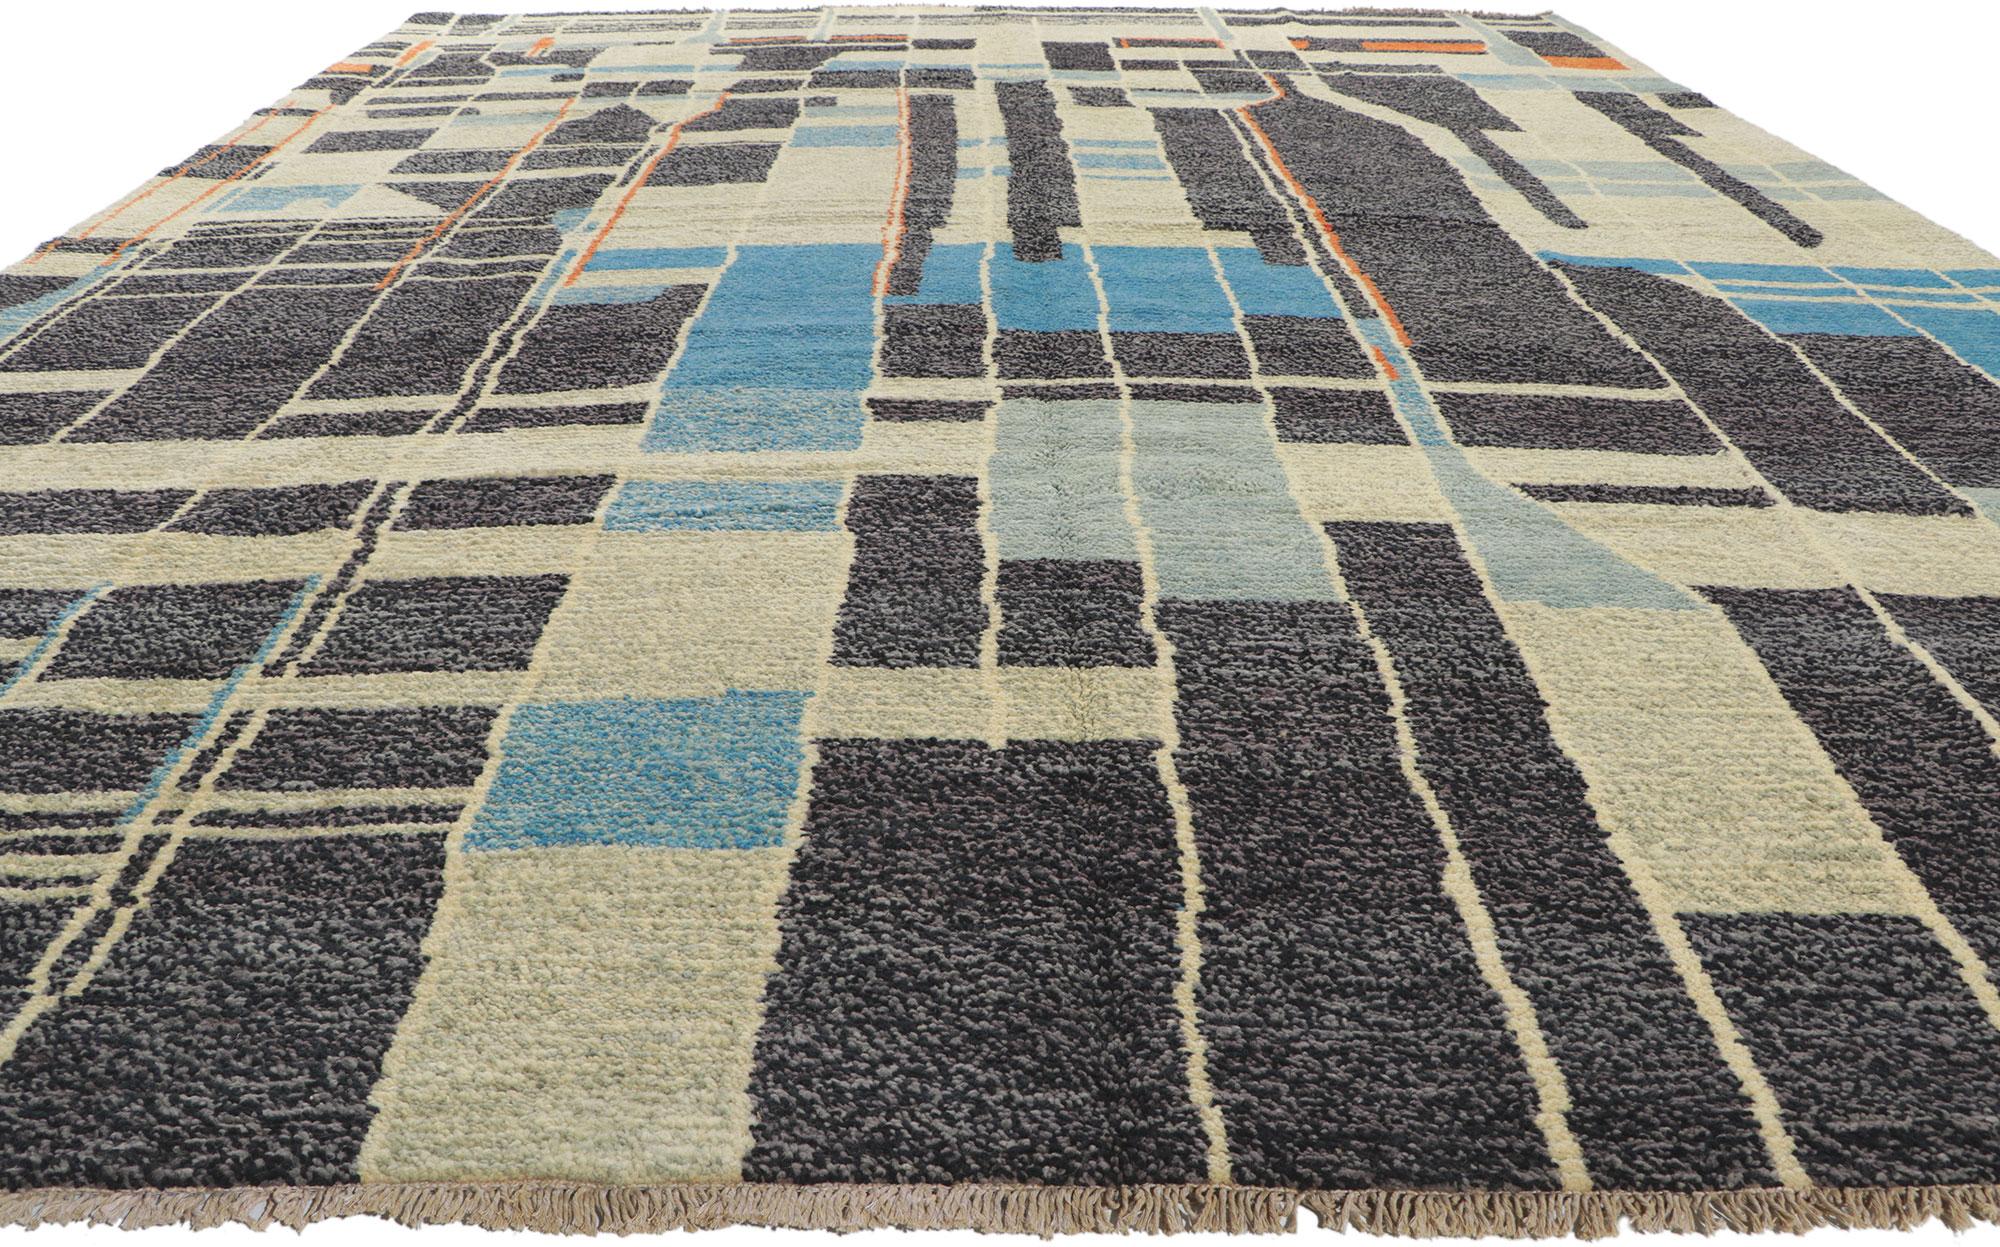 Pakistani Modern Moroccan Rug Inspired by Gunta Stolzl, Tribal Enchantment Meets Cubism For Sale